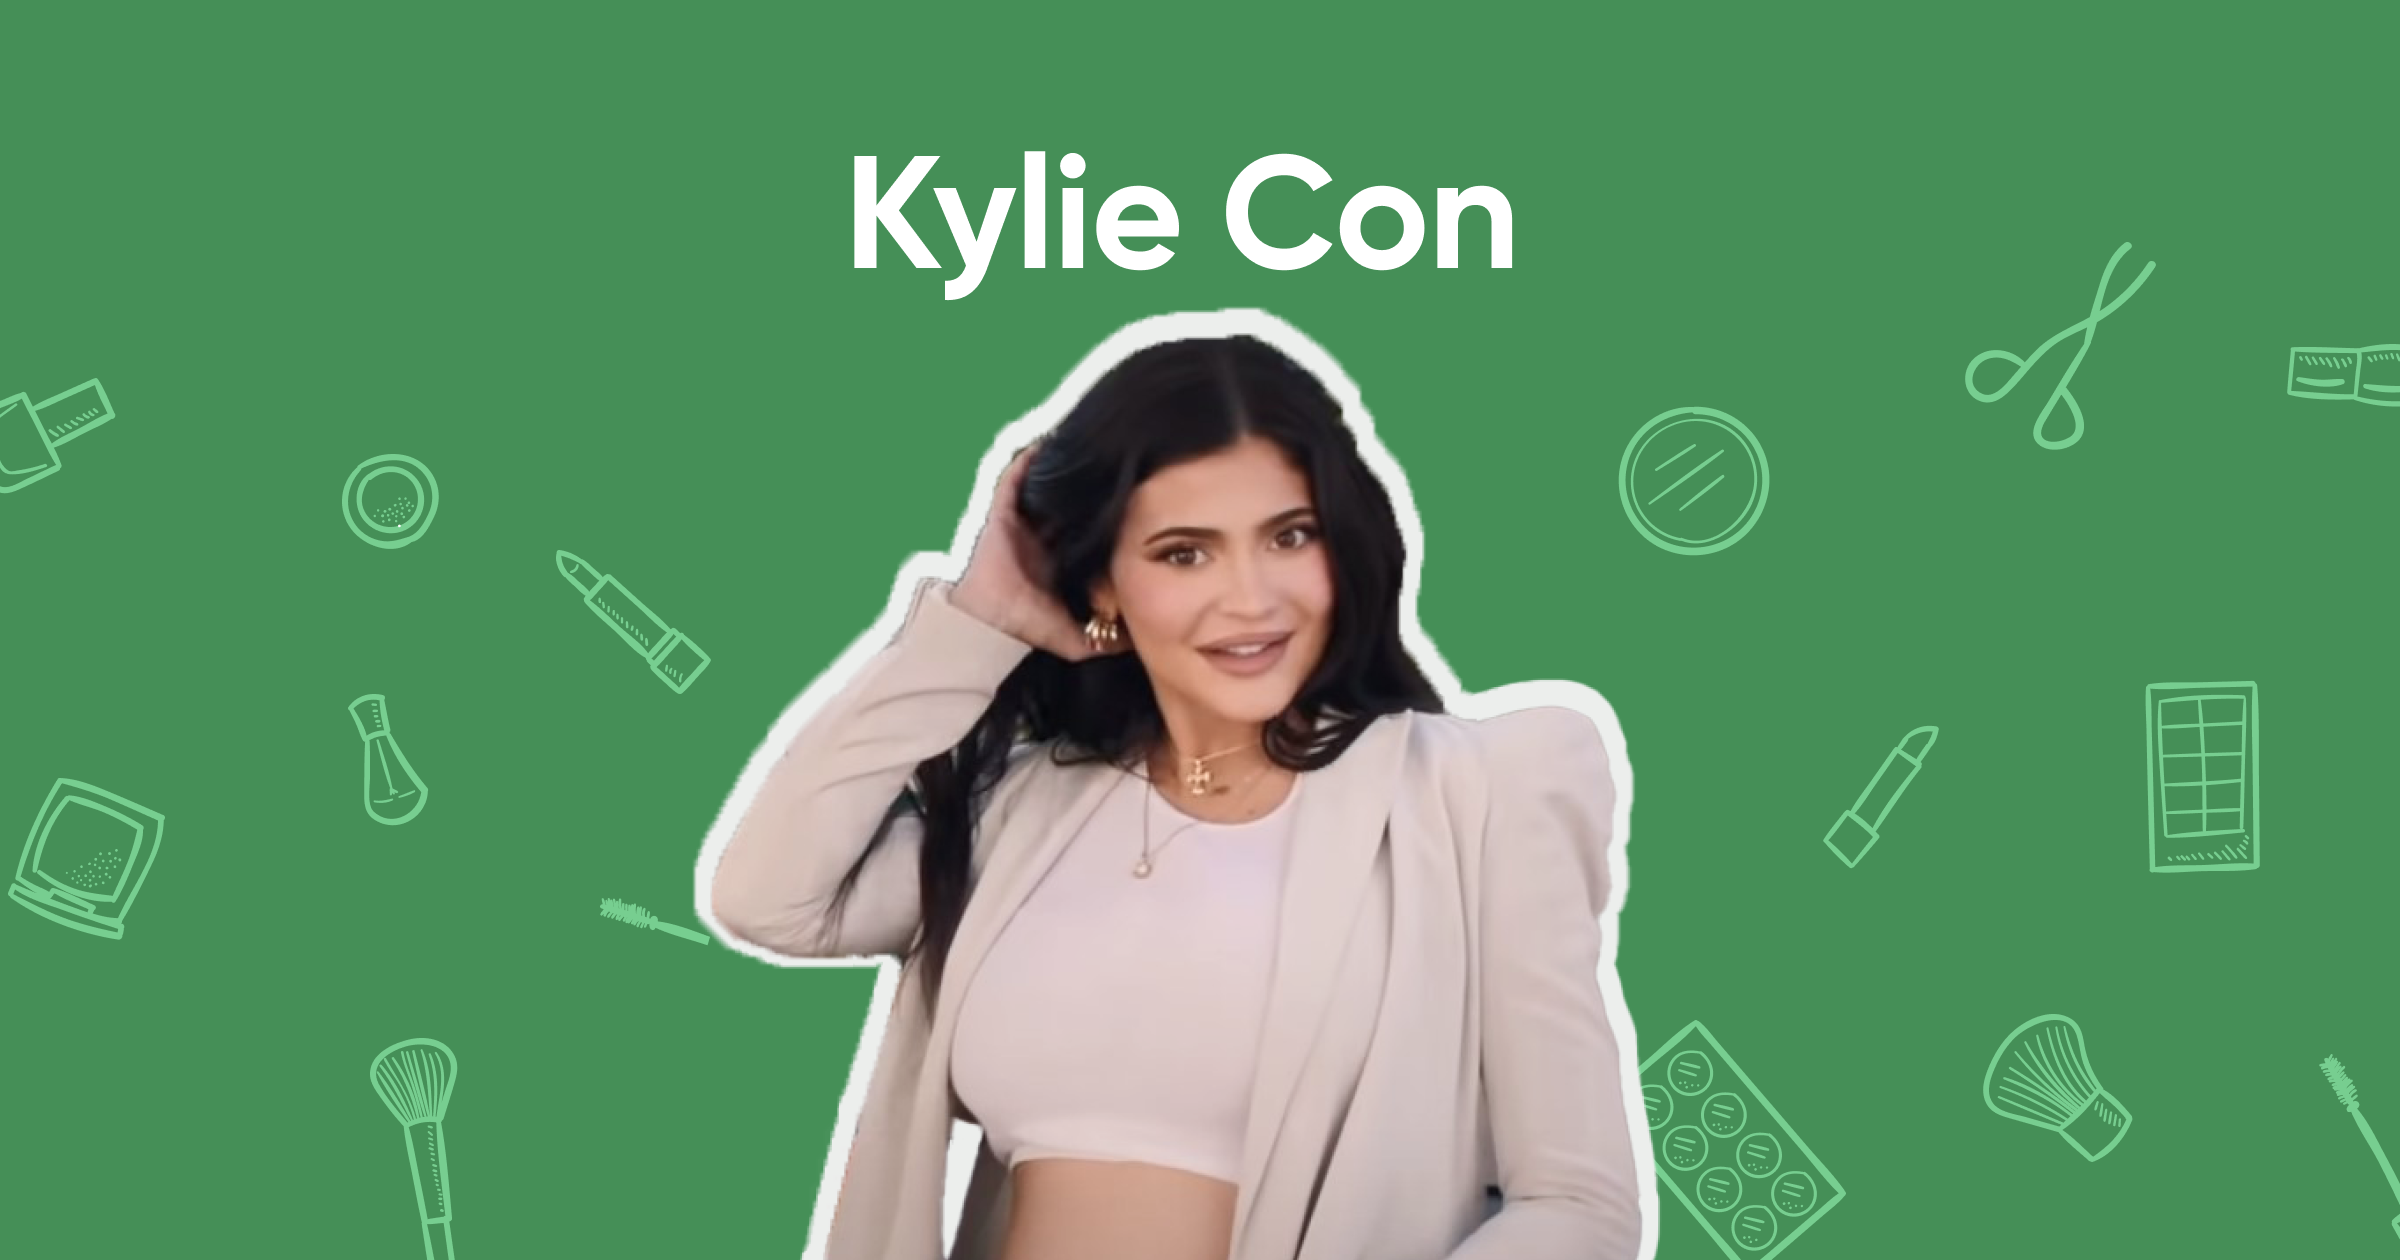 Kylie Jenner's Bold Kylie Con Trademark Move Sparks Buzz